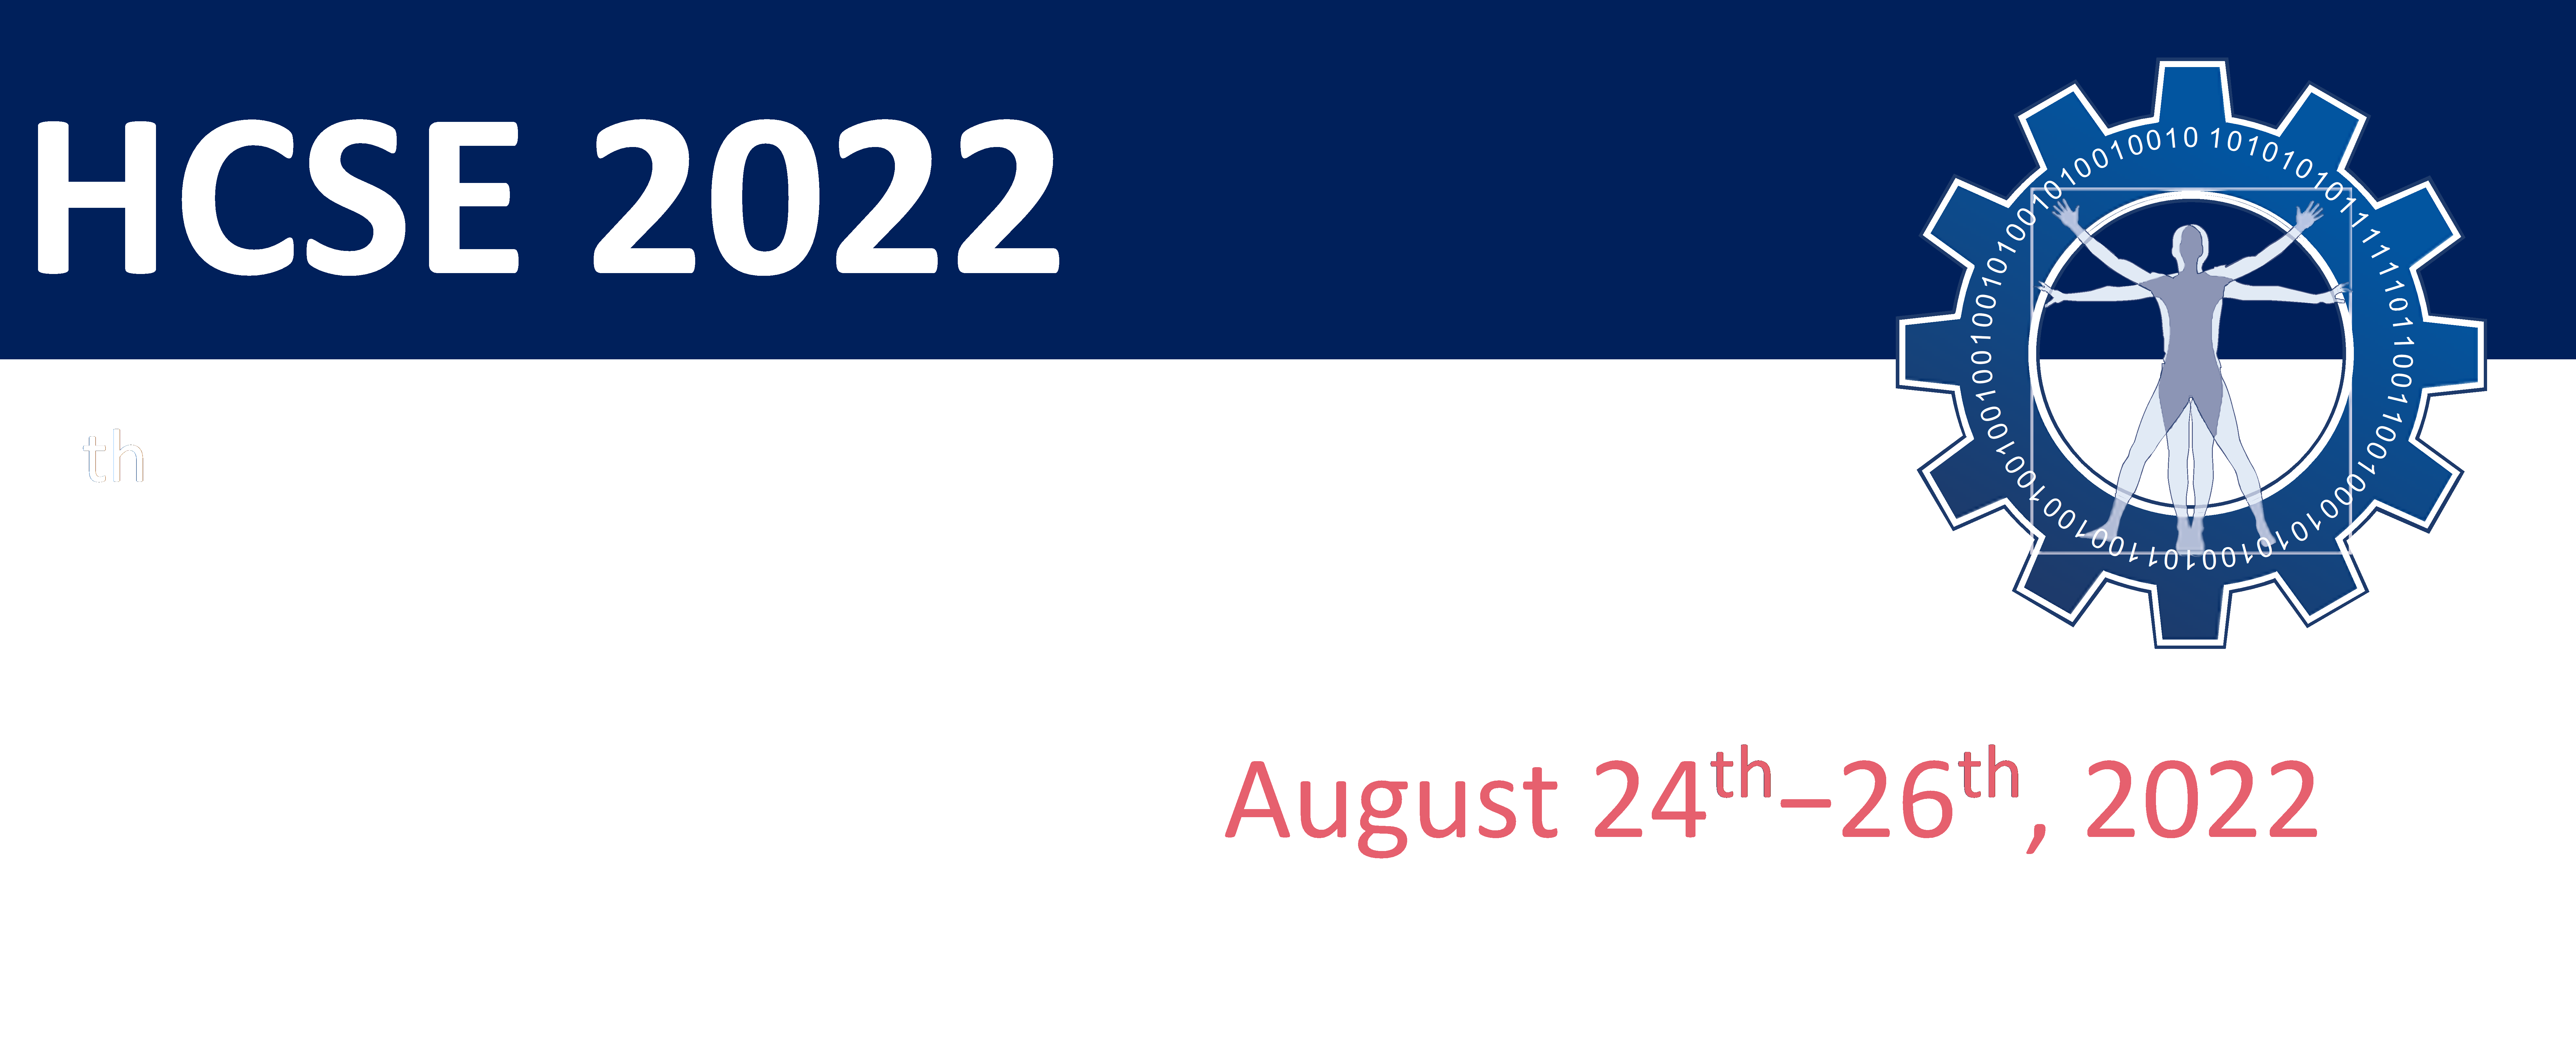 HCSE 2022 (9th International Conference on Human-Centered Software Engineering)